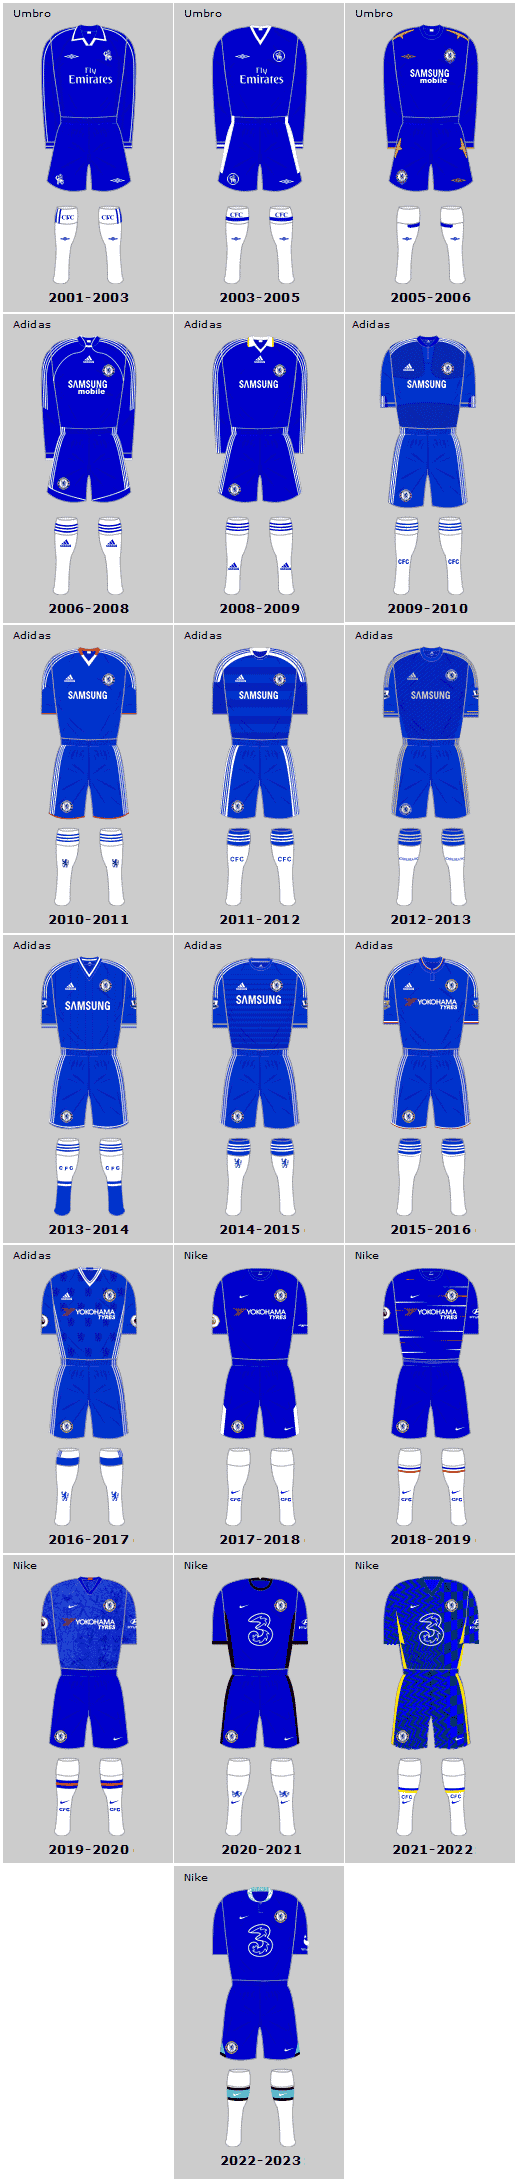 Chelsea FC 21st Century Home Playing Kits